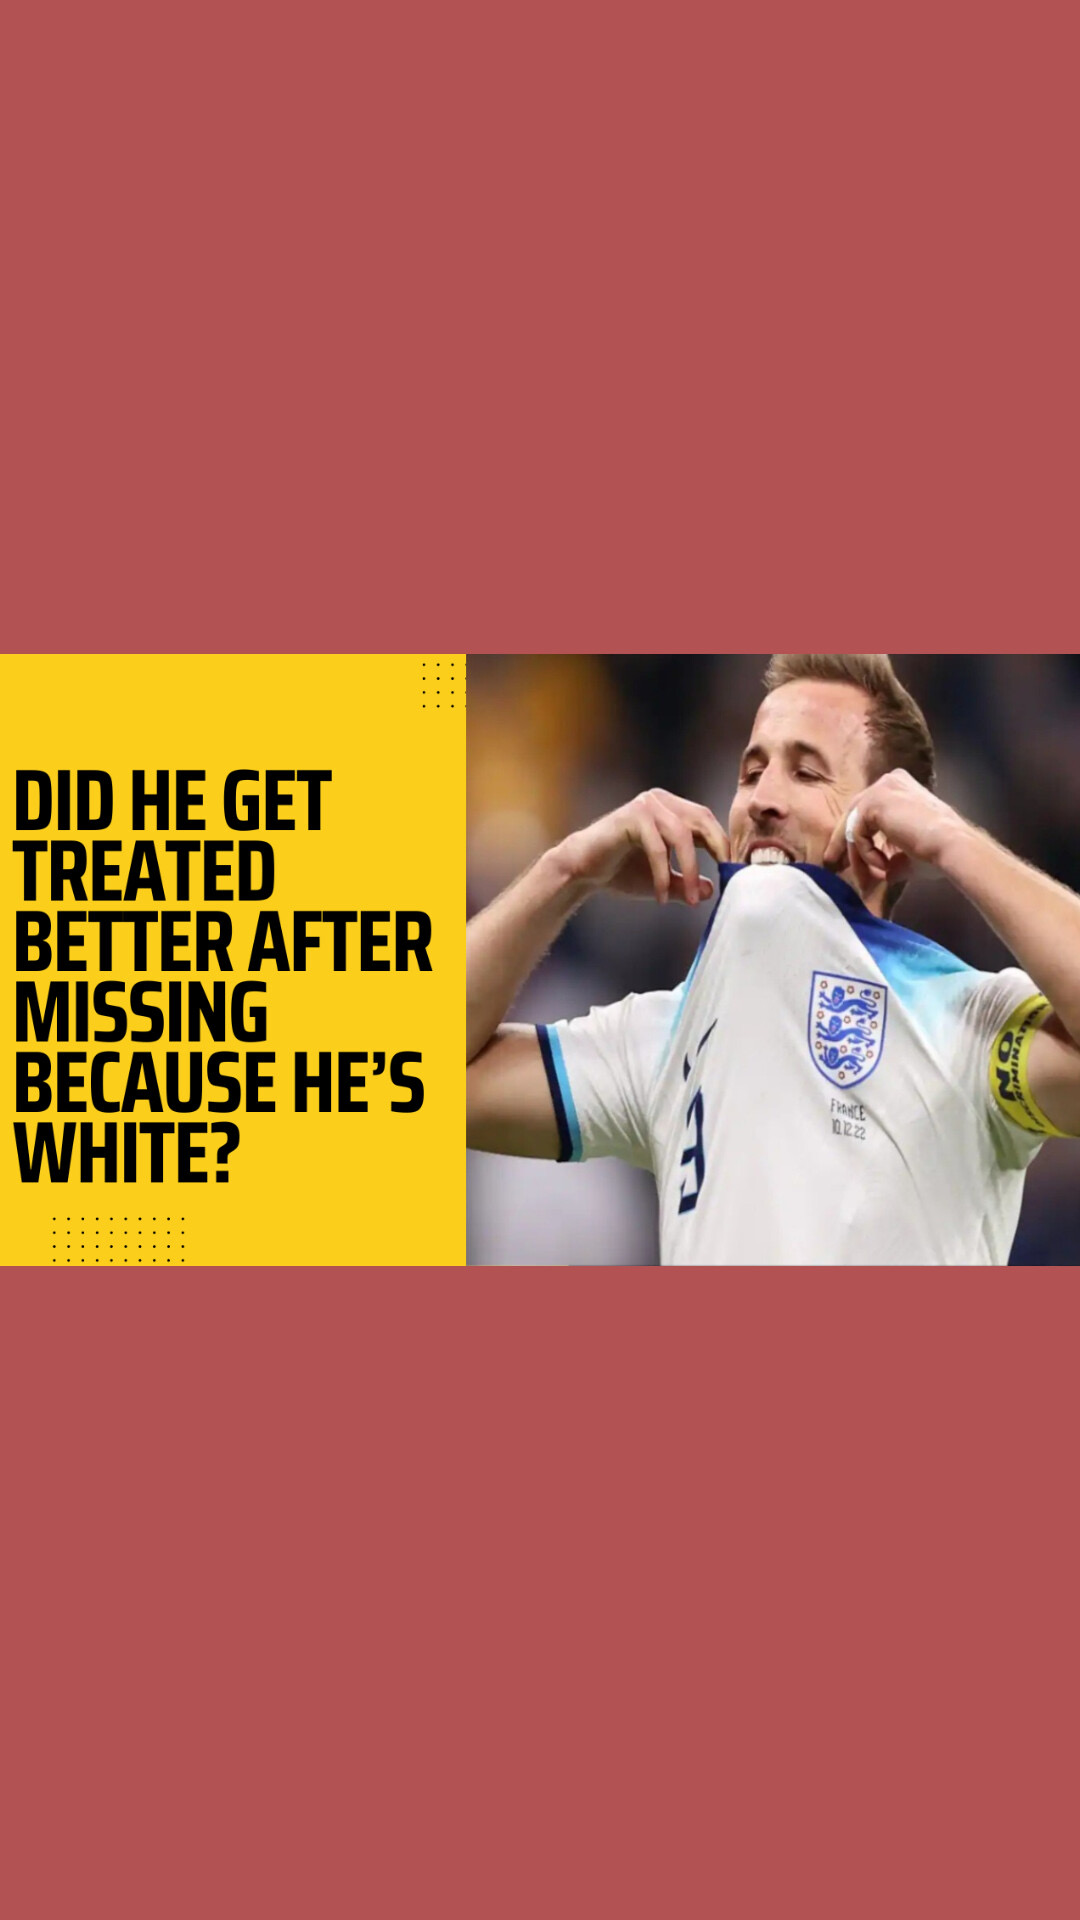 Did Harry Kane Get Treated After Missing Because He’s White?